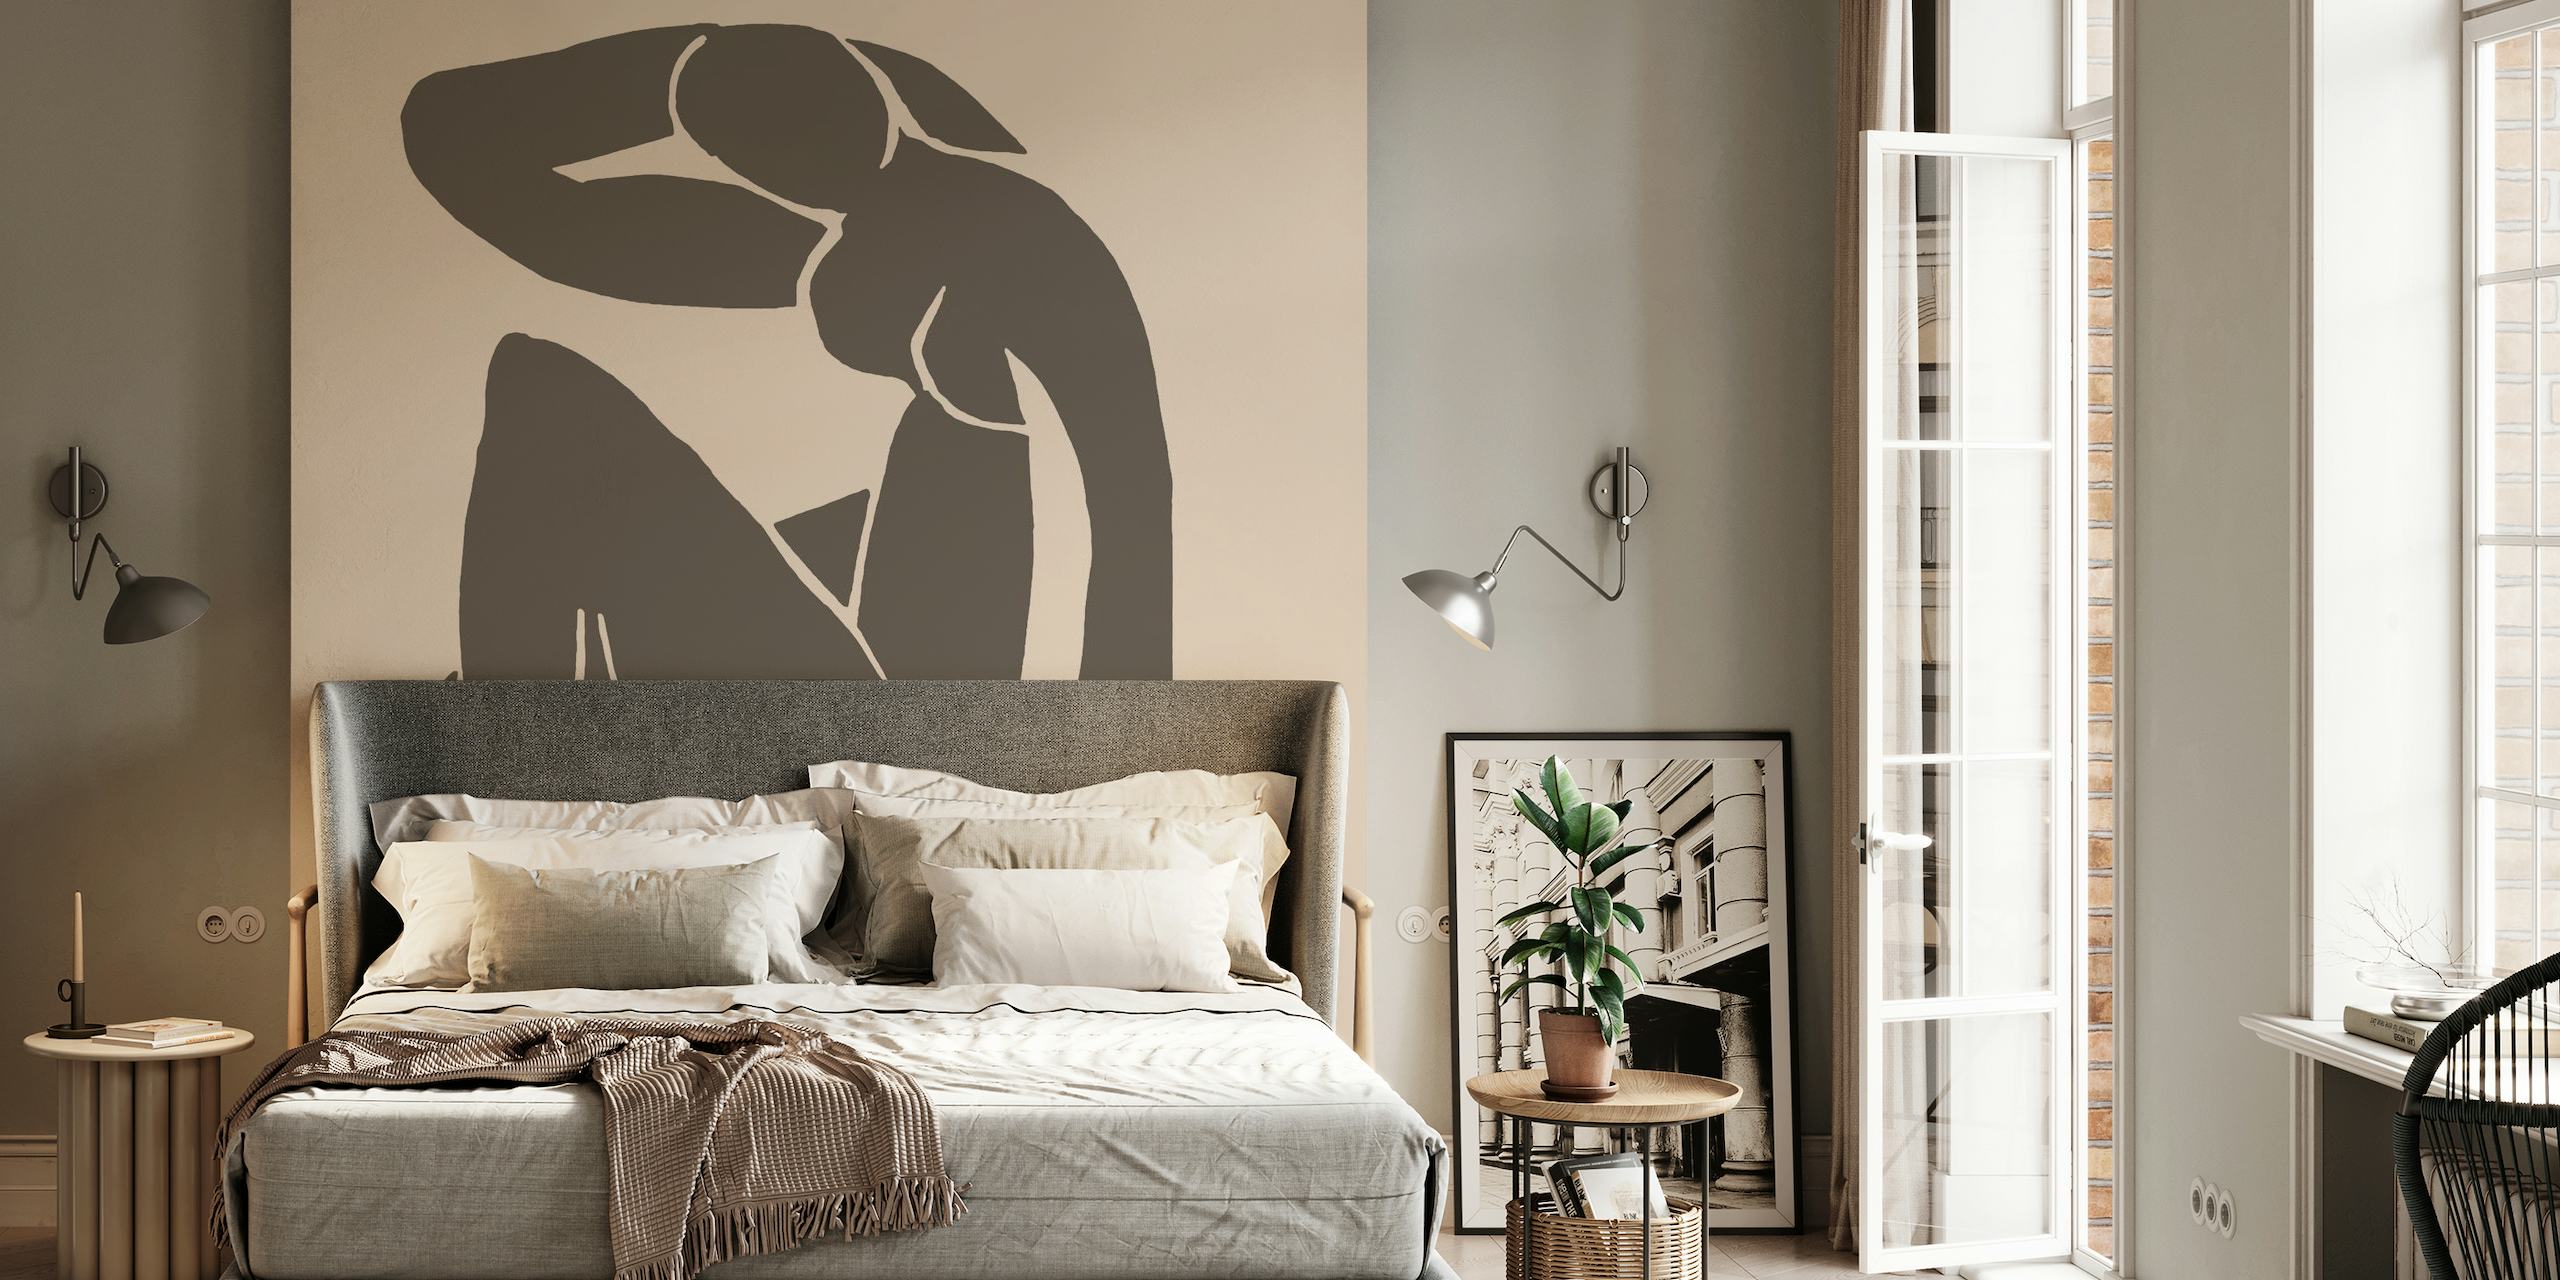 Beige Nude silhouette wall mural inspired by Matisse's minimalist style